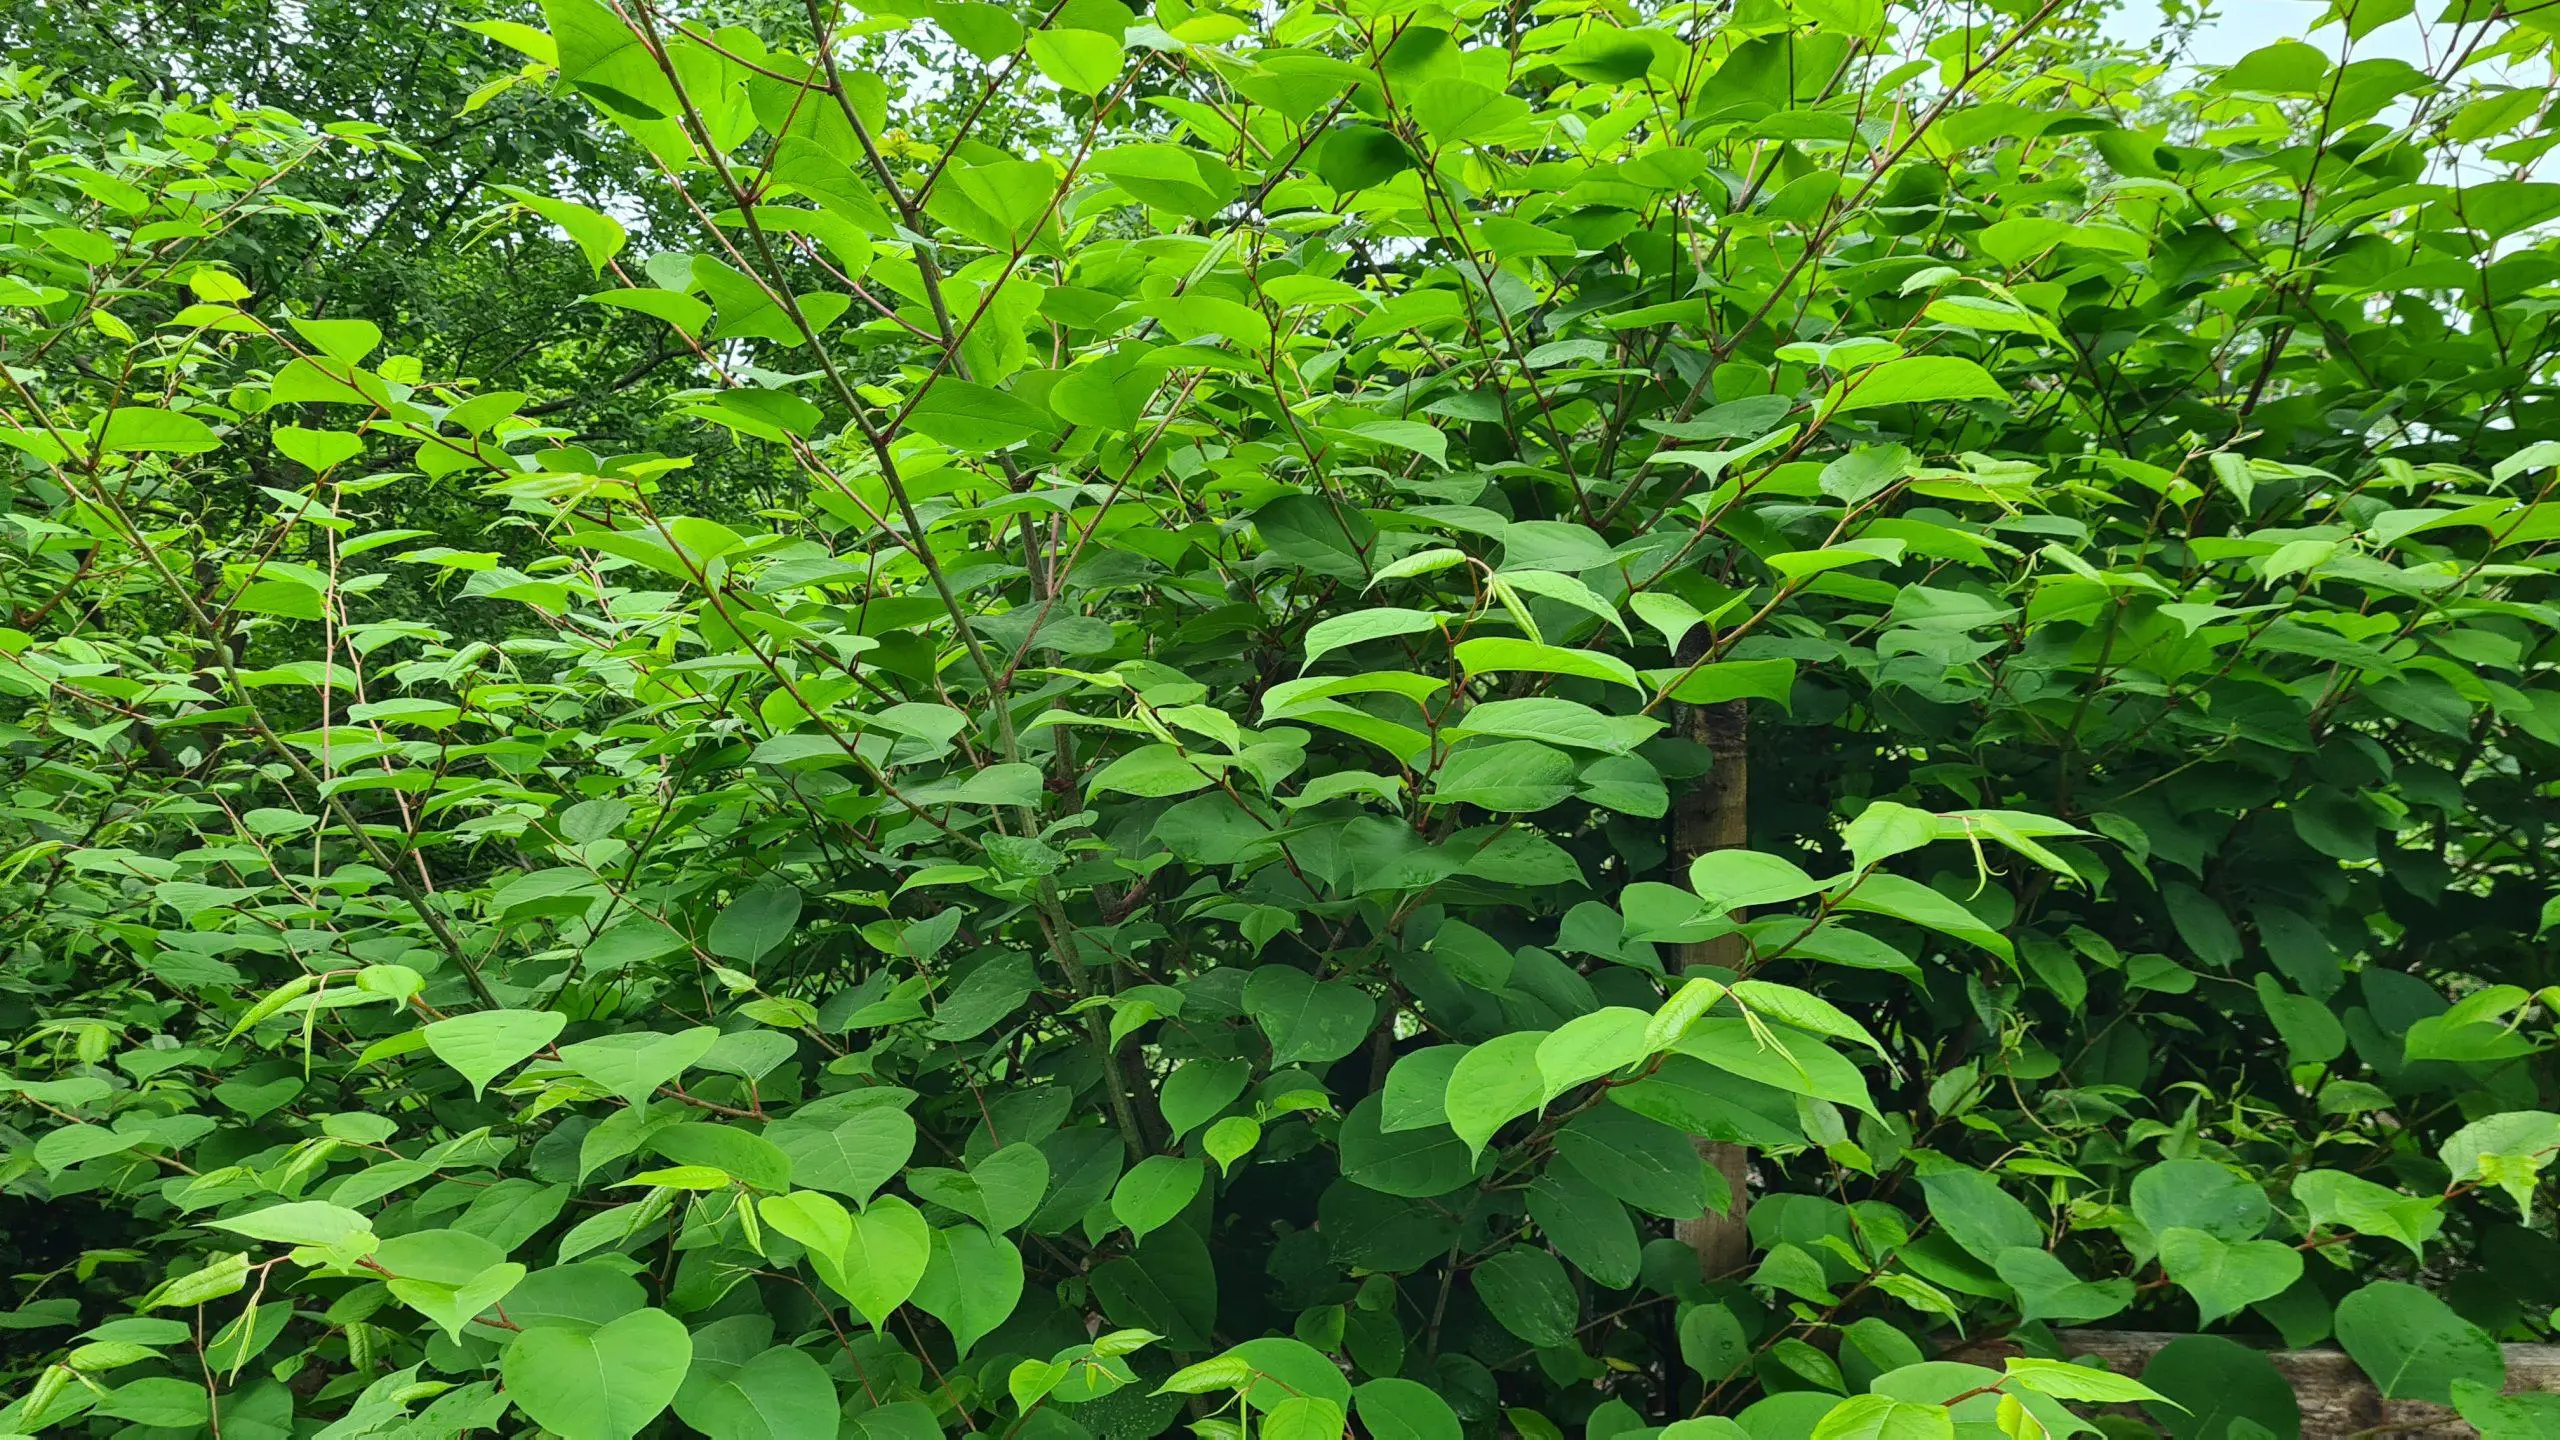 The density of Japanese knotweed demonstrates how invasive this weed is and why there are laws prohibiting the planting of it intentionally